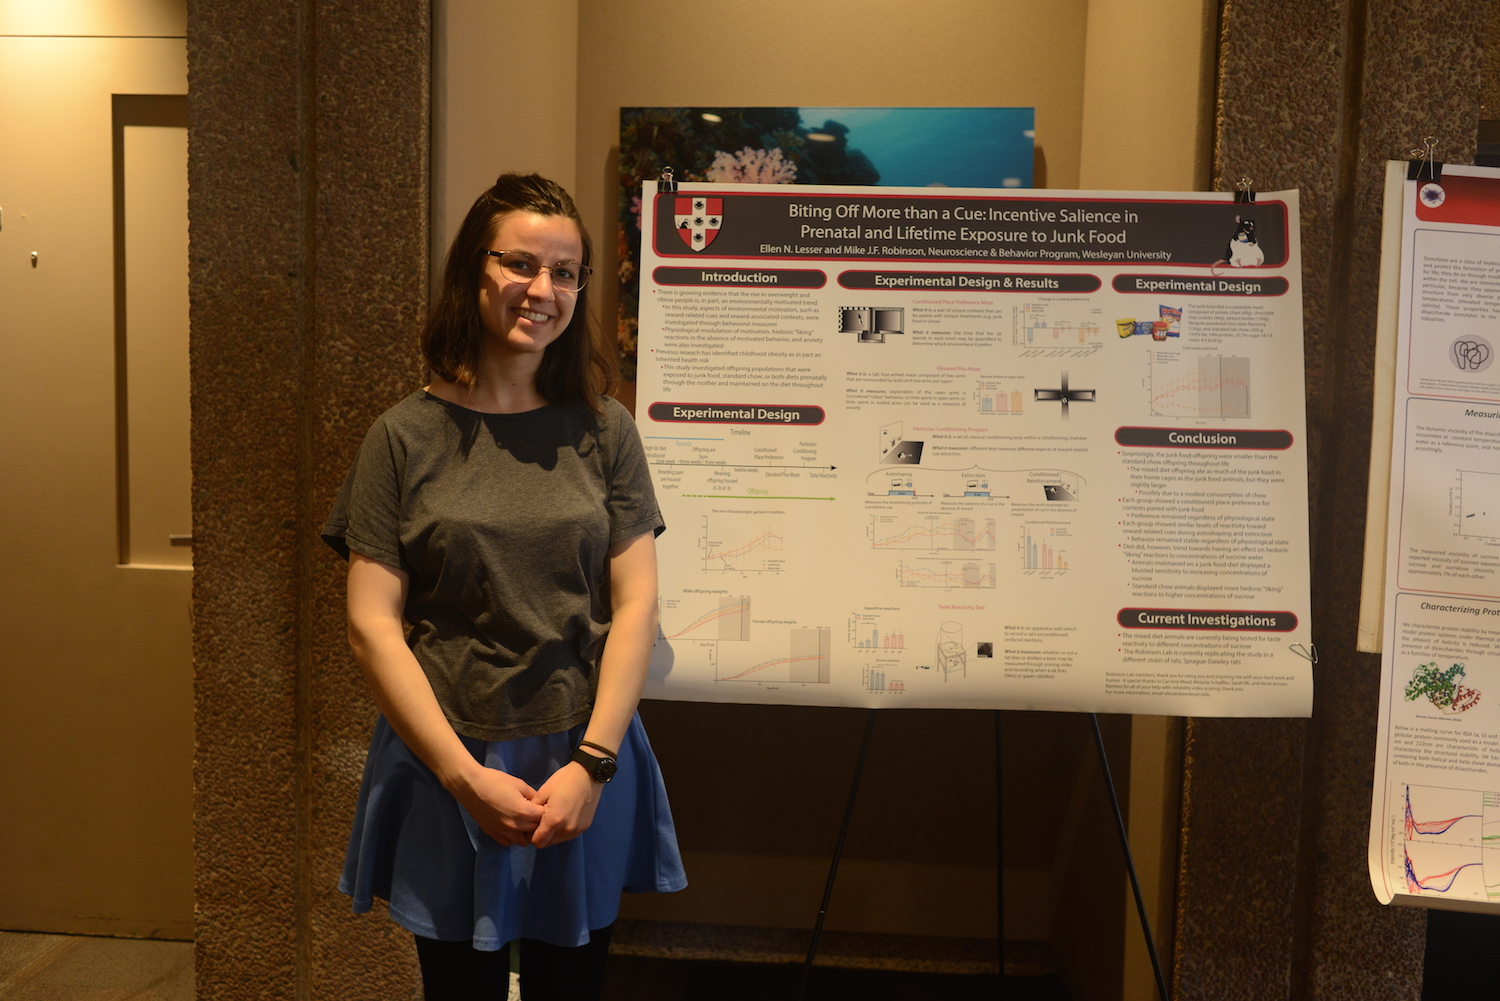 Ellen Lesser '15 presented her research, "Biting Off More Than a Cue: Incentive Salience in Prenatal and Lifetime Exposure to Junk Food."